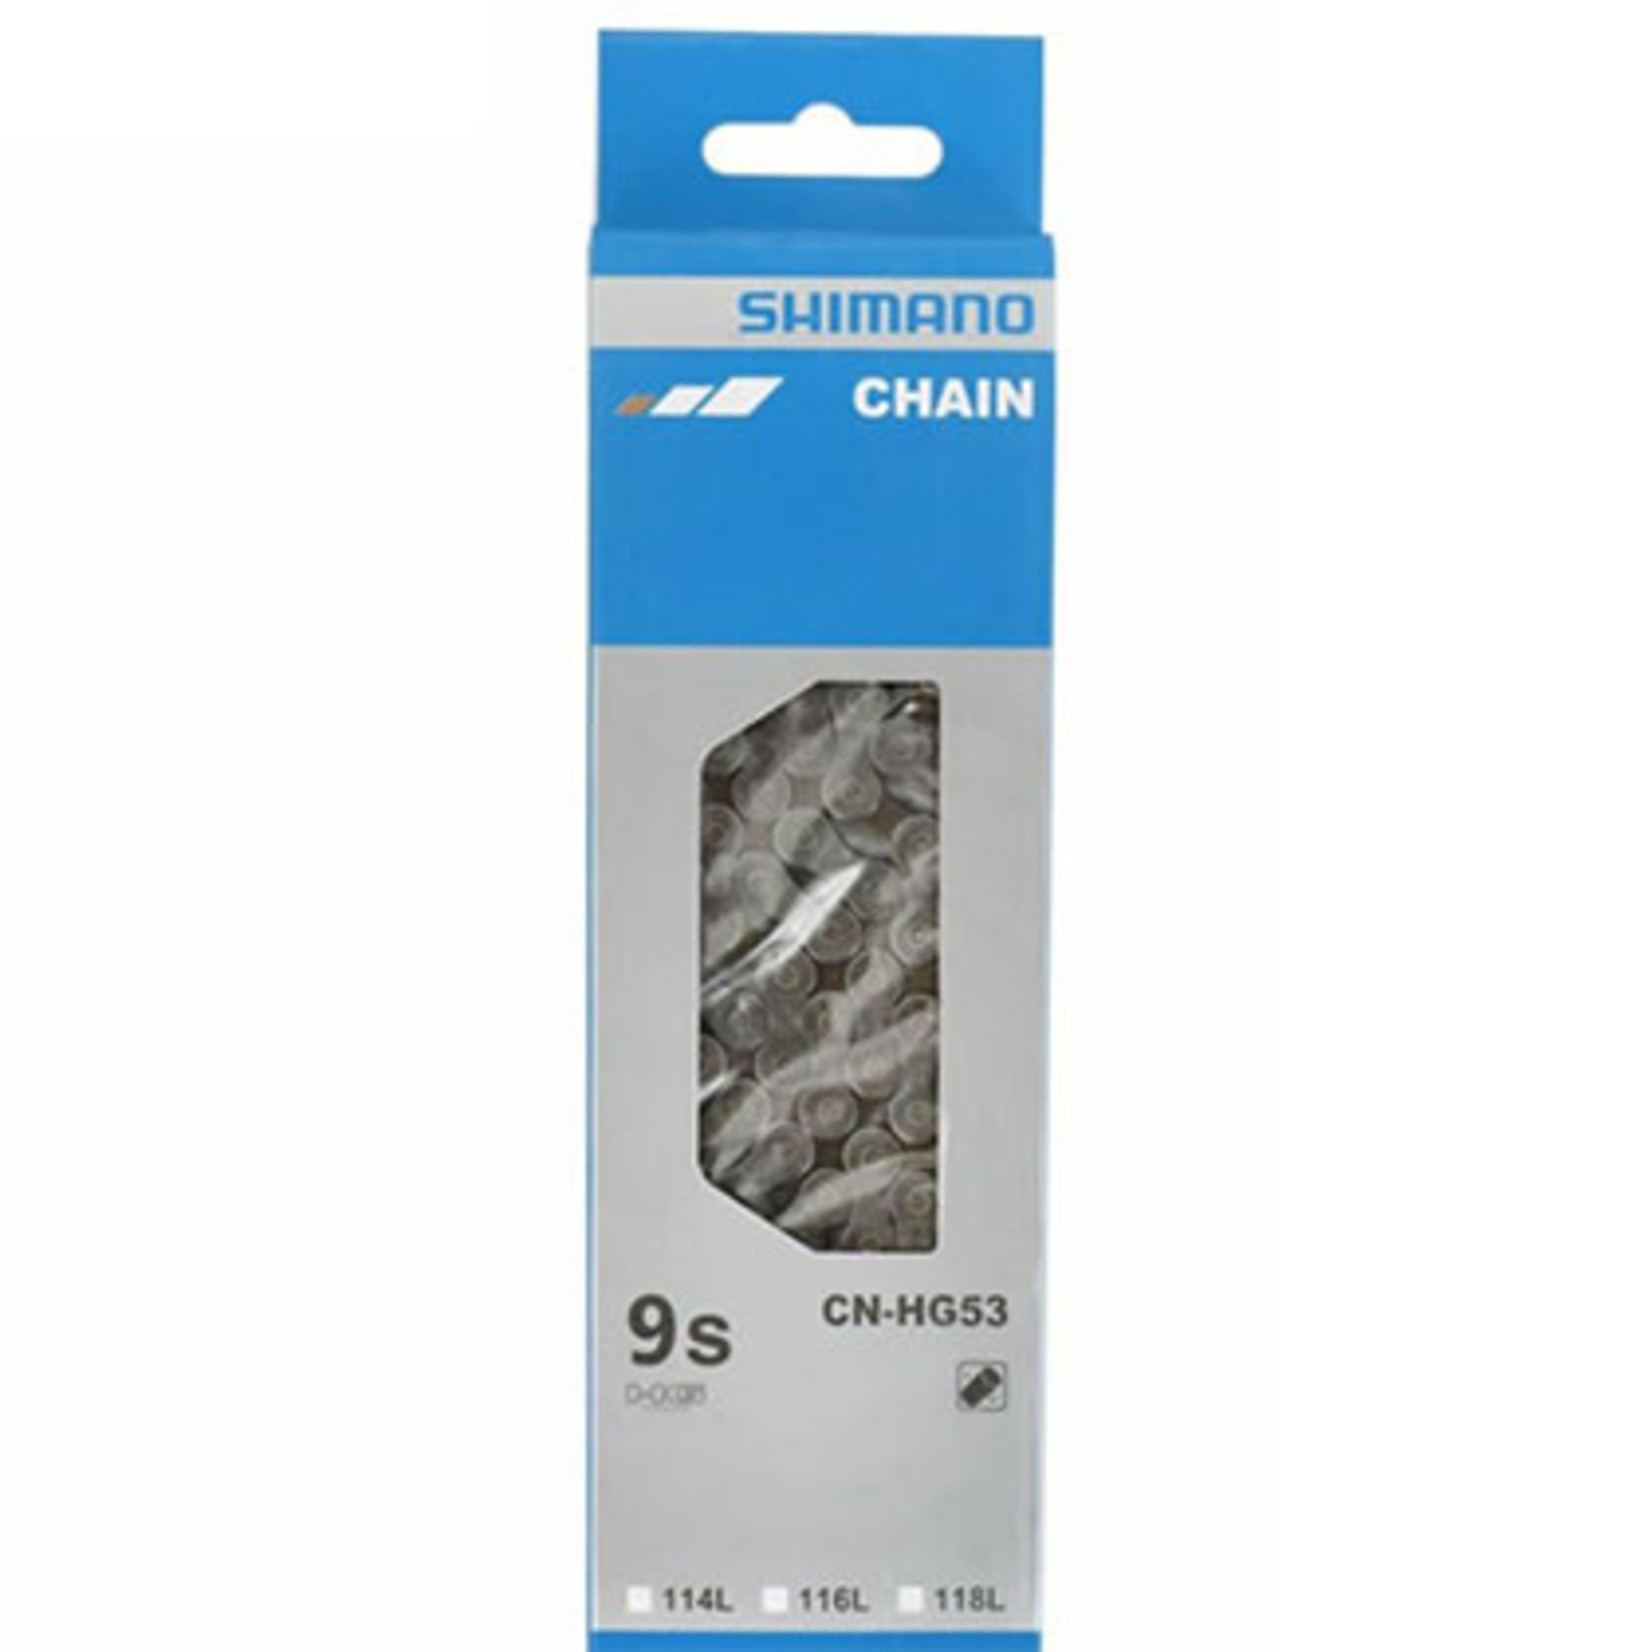 SHIMANO CN-HG53 CHAINS - 9-SPEED